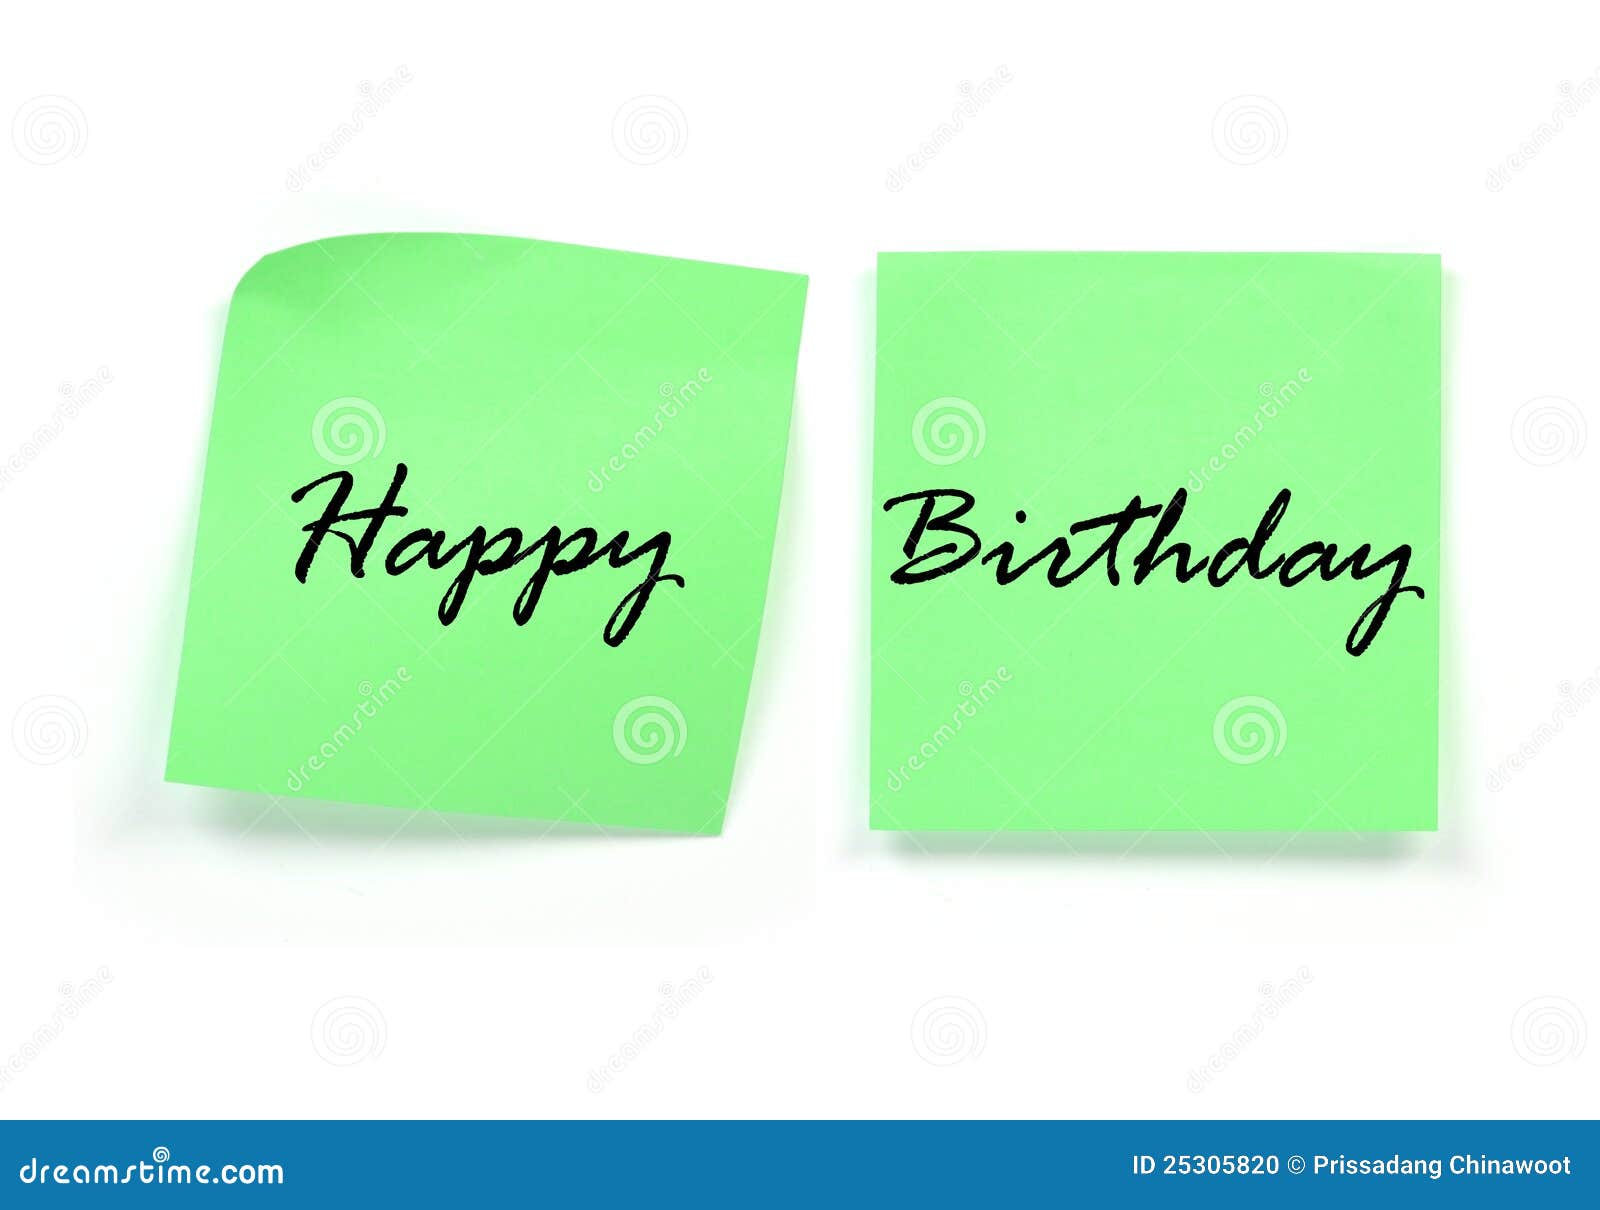 Happy birthday stock photo. Image of compliment, message - 25305820